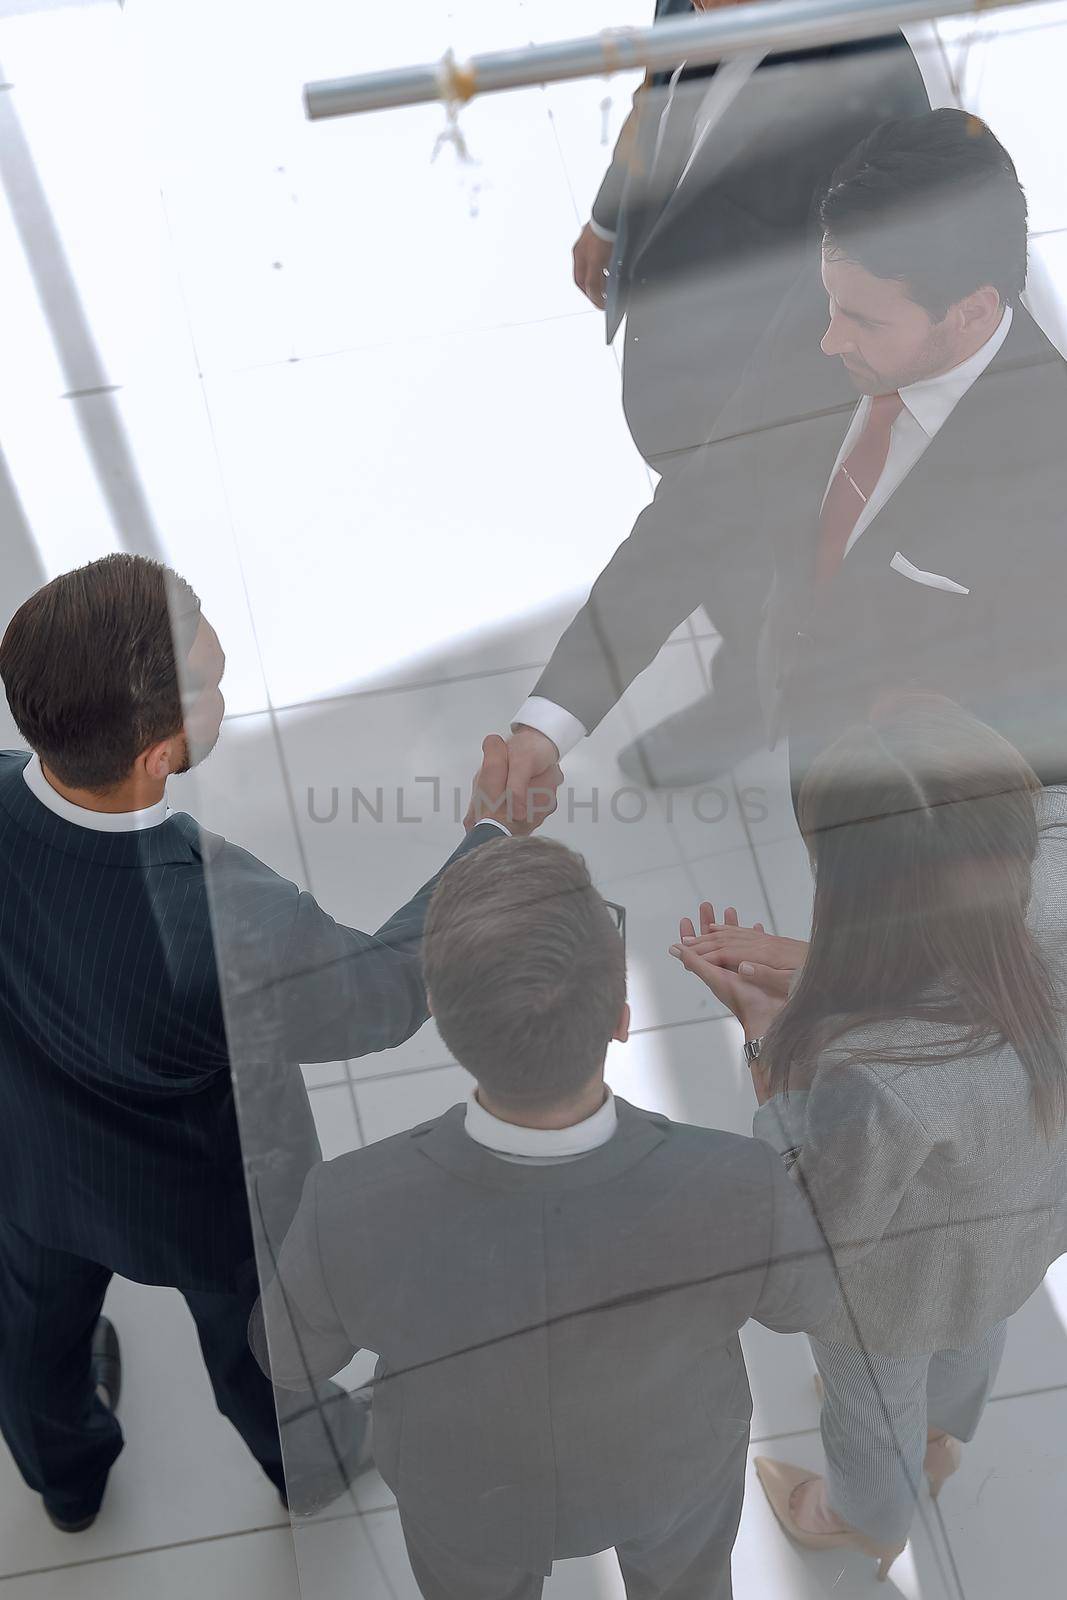 business background.handshake business men in the circle of employees. business concept